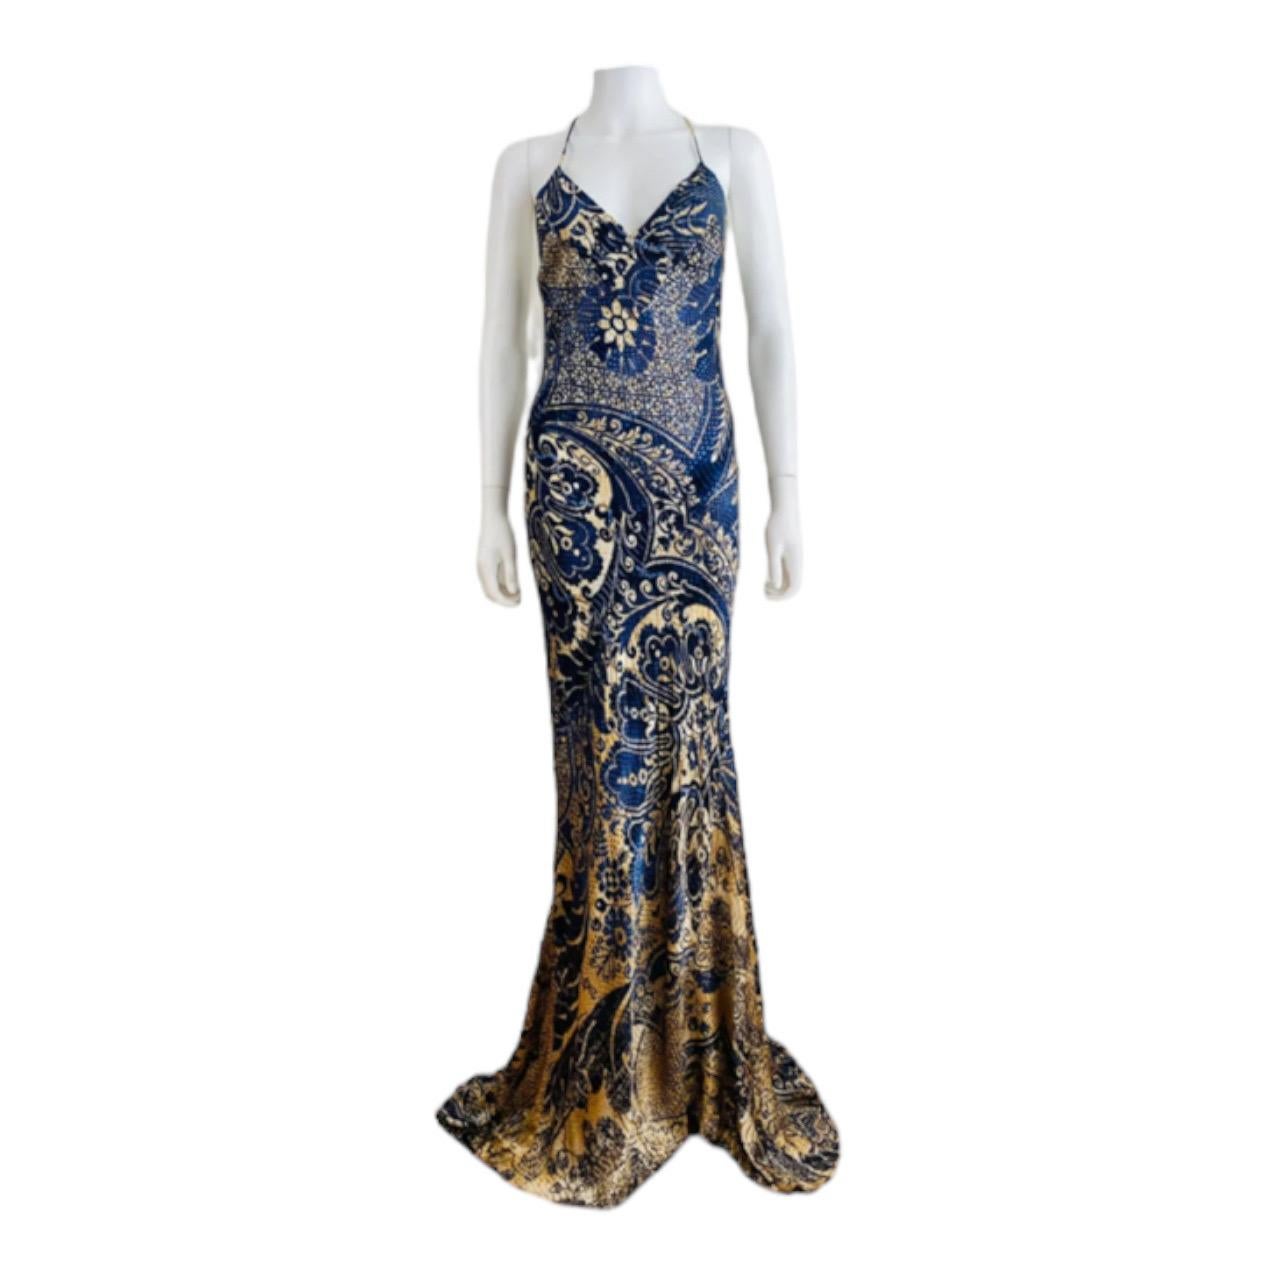 Stunning 2005 Roberto Cavalli Dress
Navy blue + tan print on silk
Thin shoulder strap that cross on the upper back
Fitted bust with V neckline
Thin shoulder straps
Fitted dress throughout with mermaid flared hem
Train in the back
Maxi